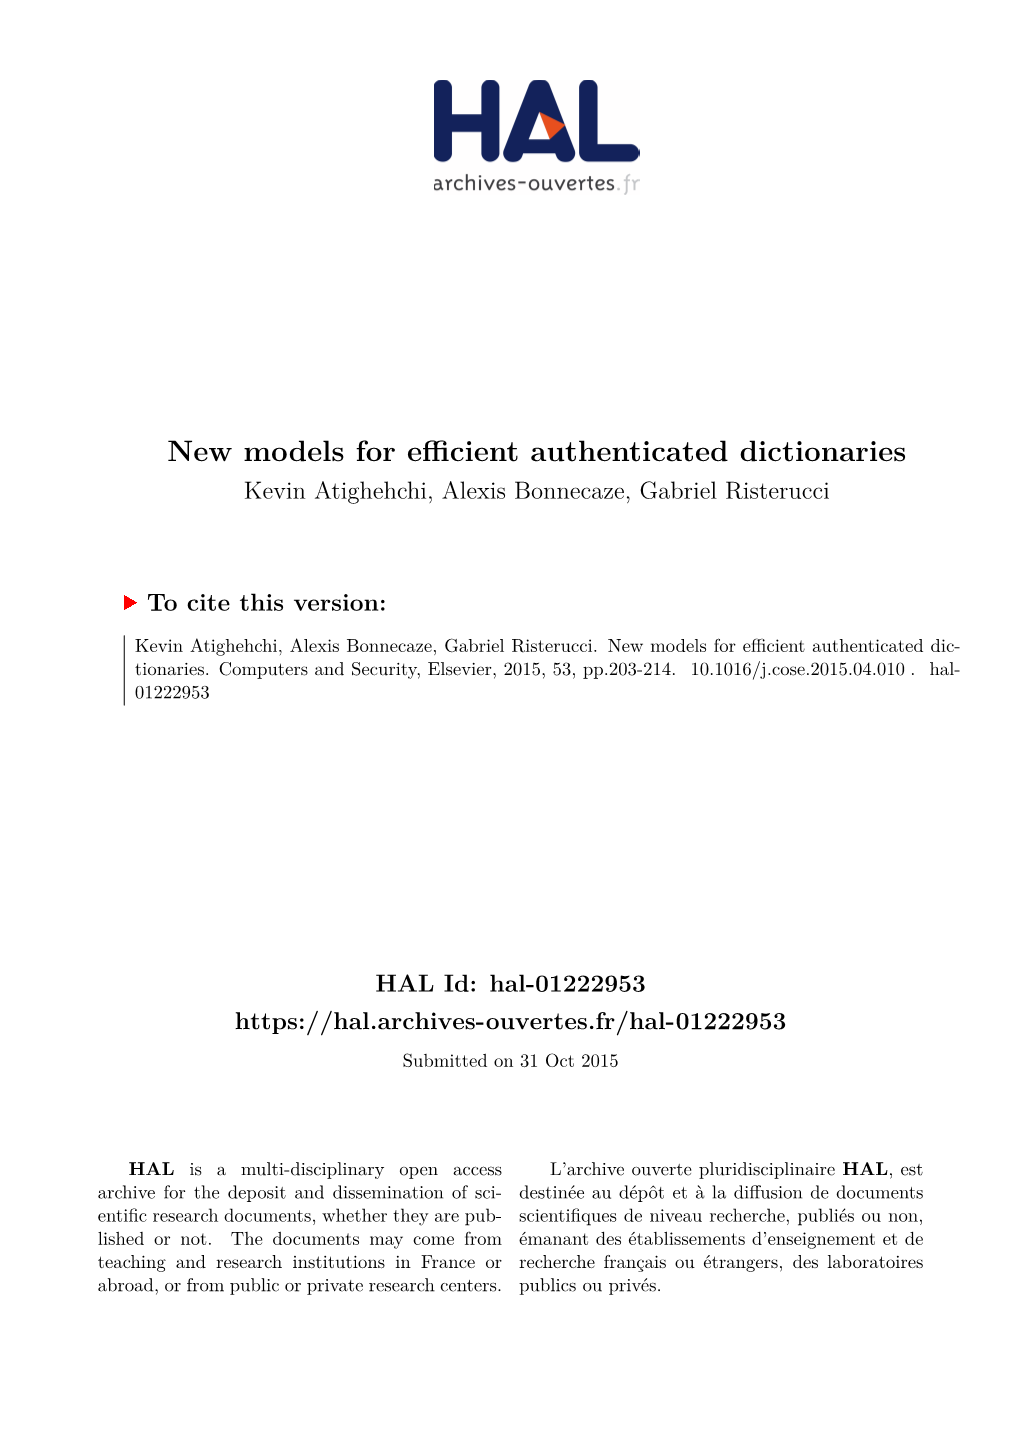 New Models for Efficient Authenticated Dictionaries